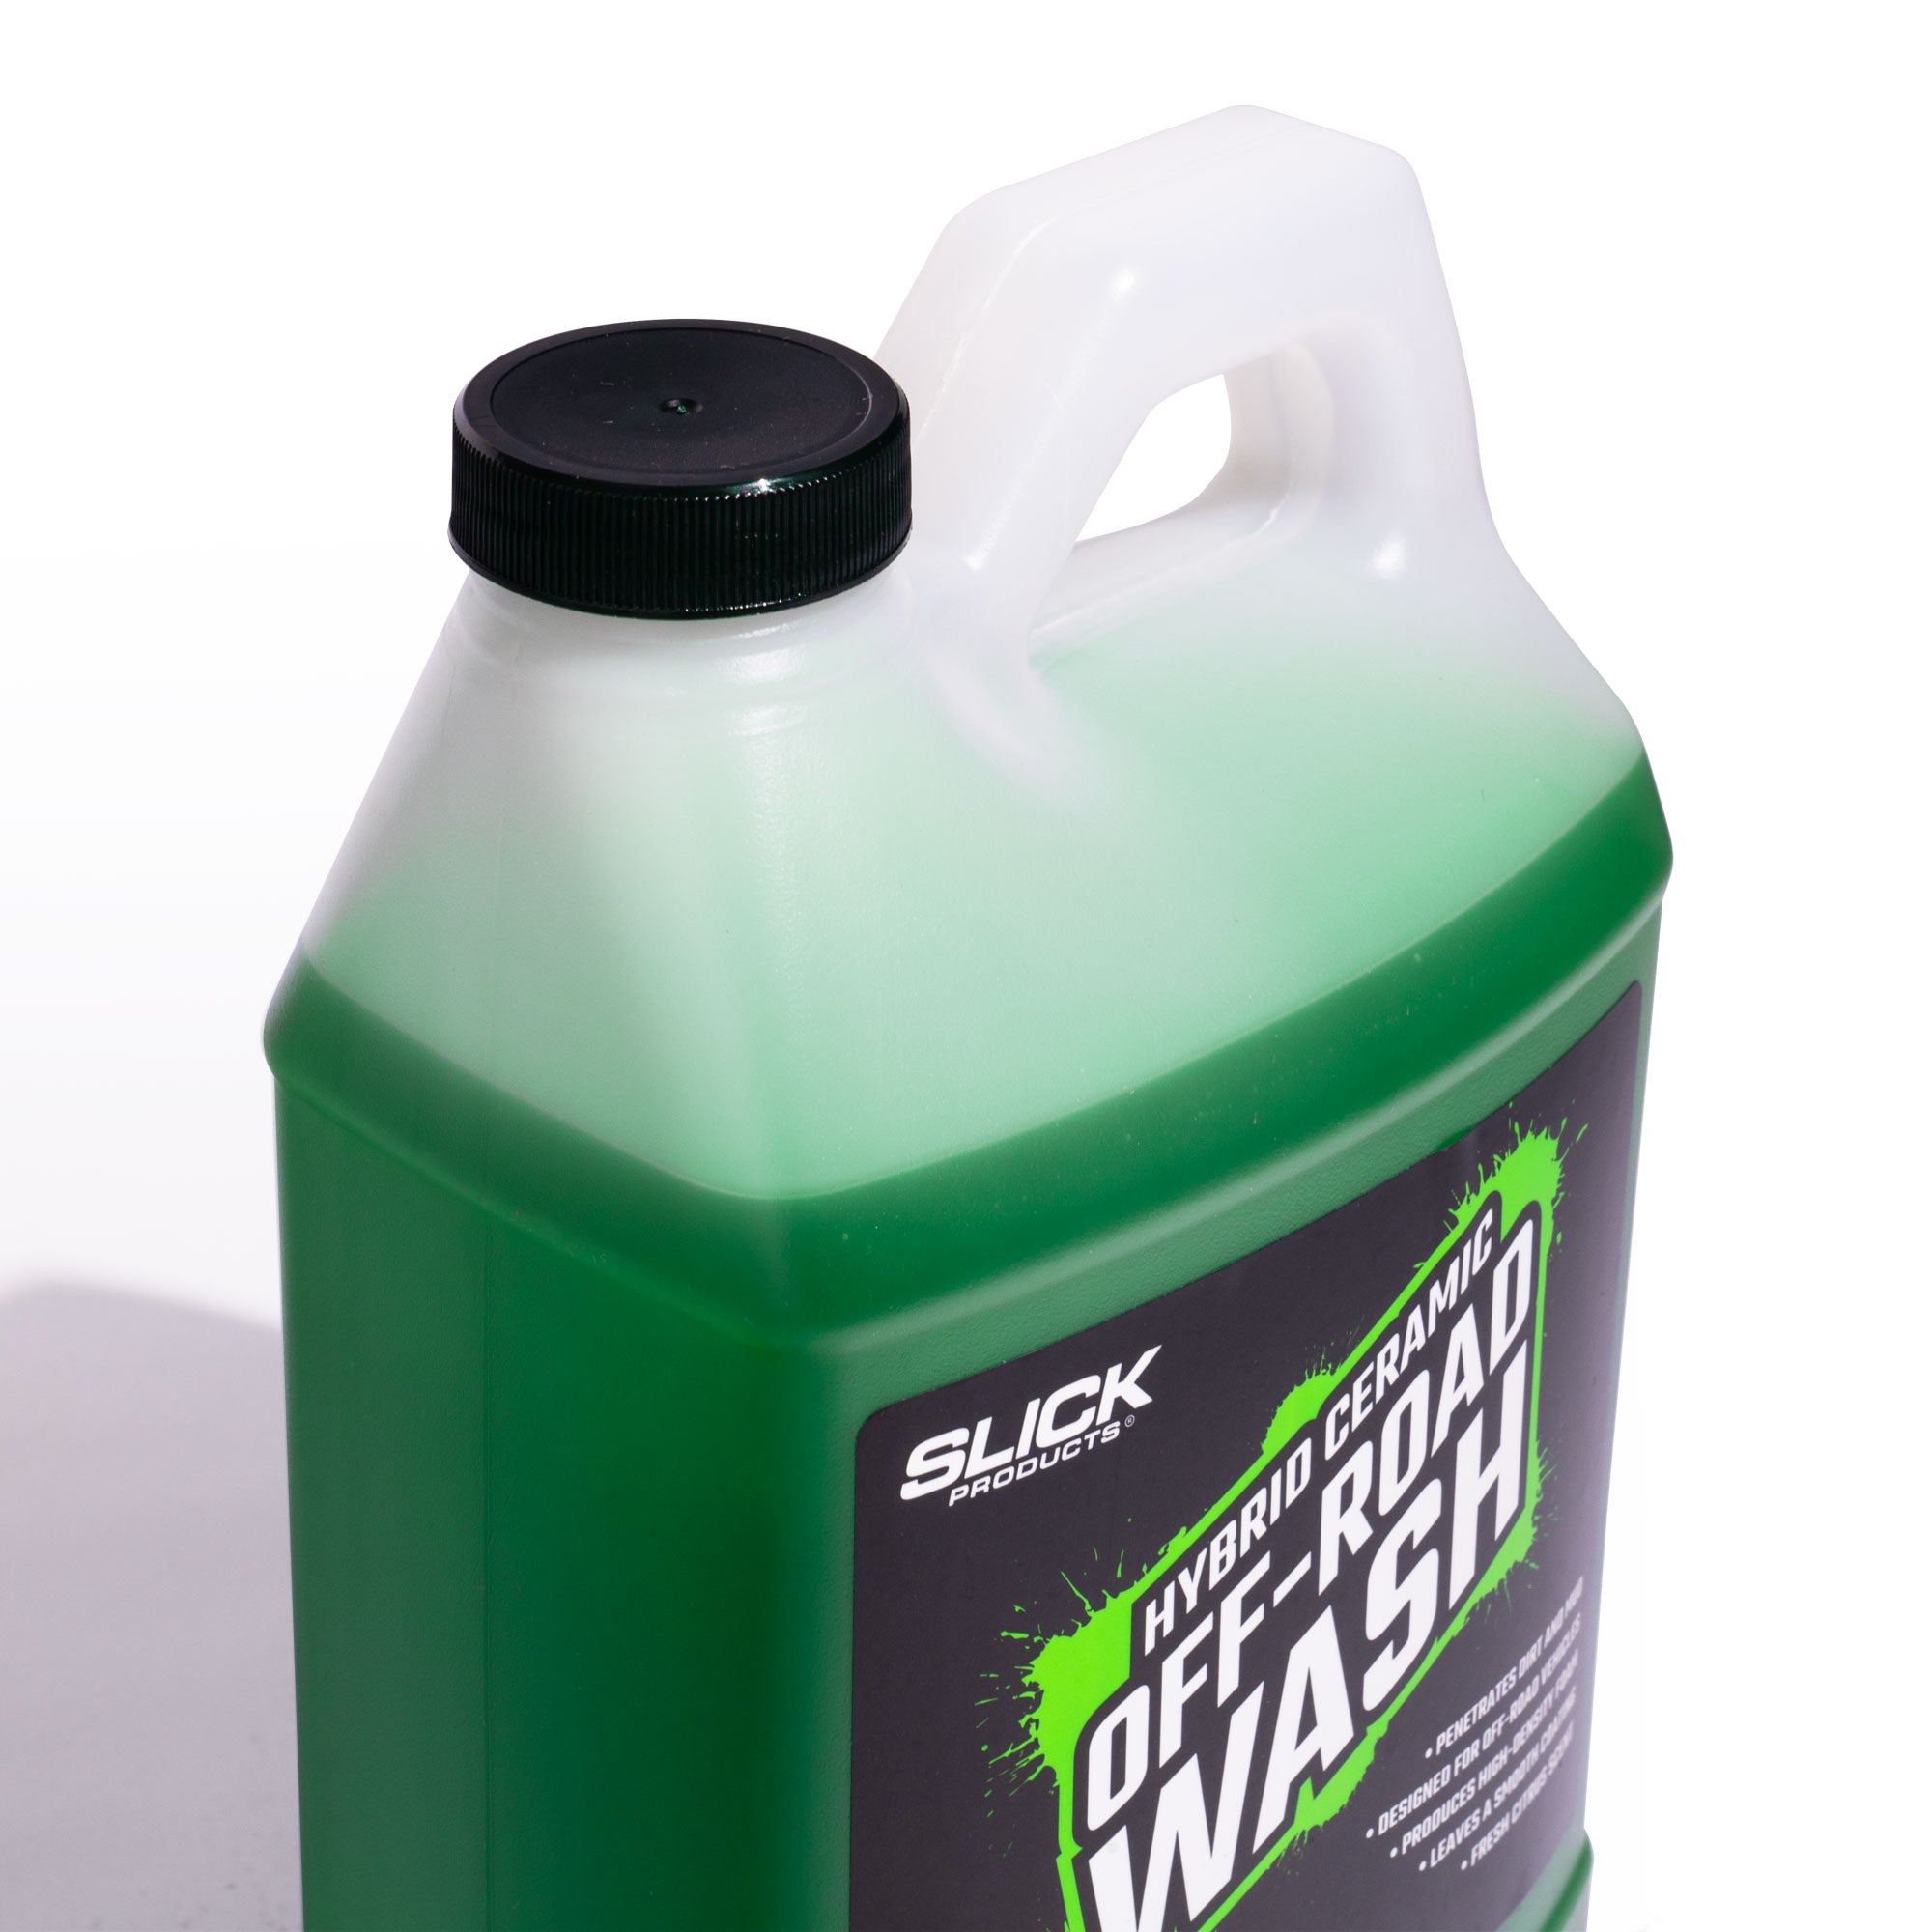 Slick Products Off Road Wash Concentrate 32 oz. 